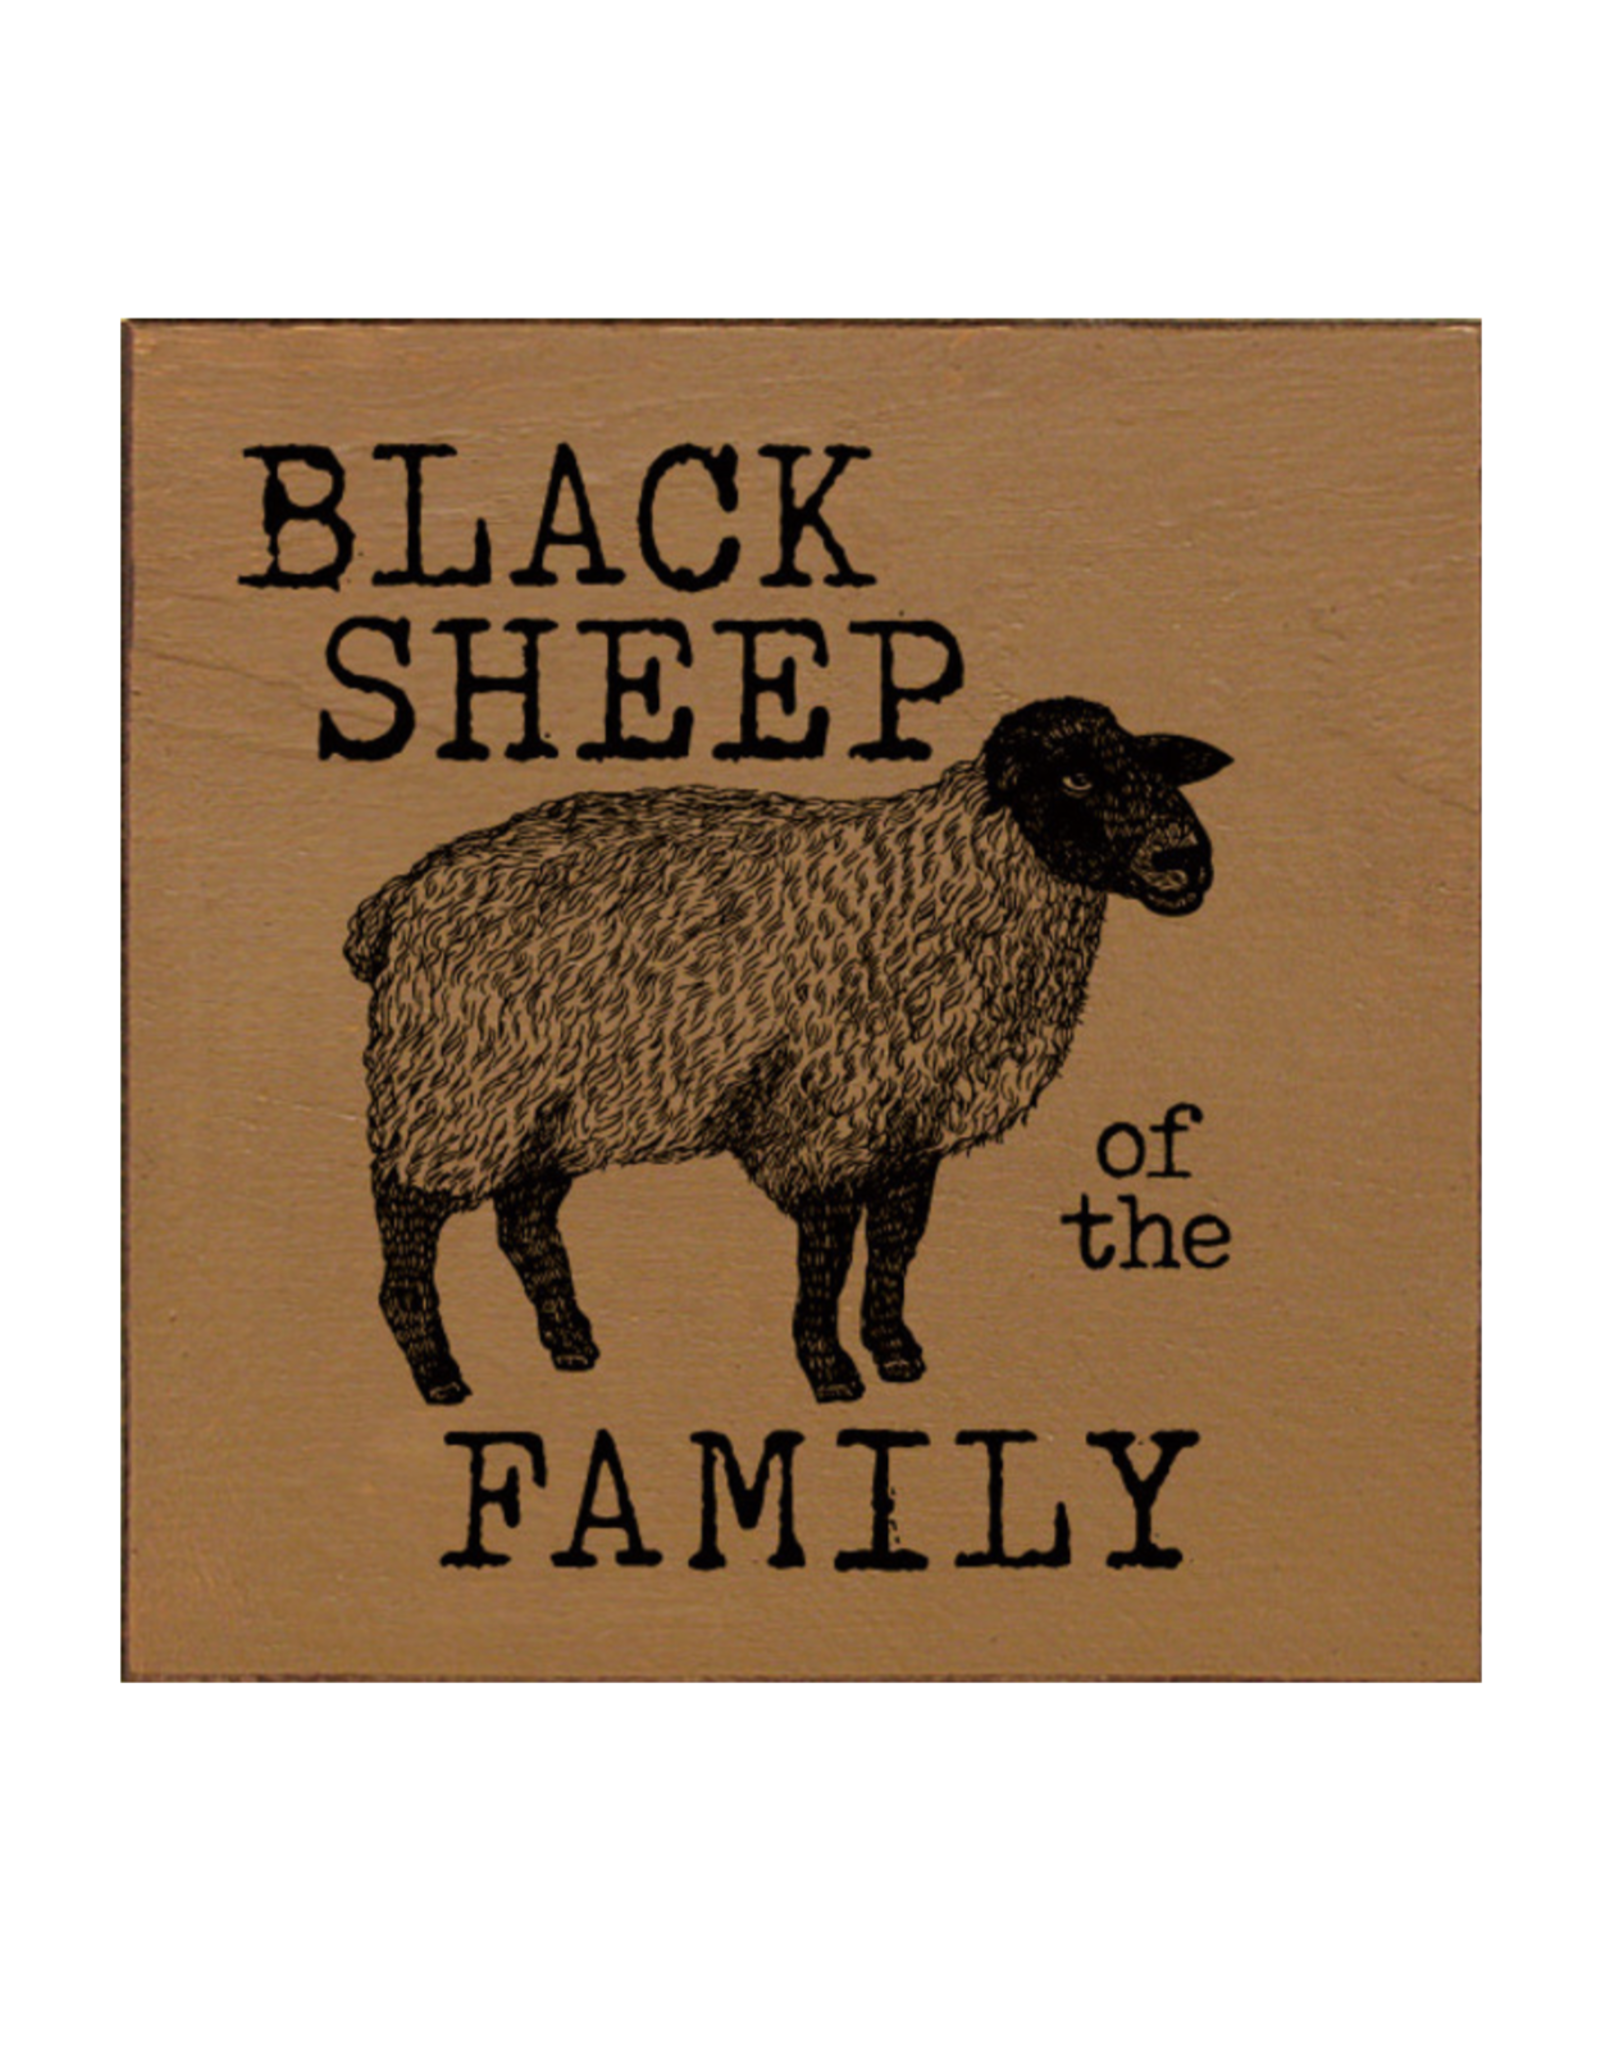 Sawdust City Black Sheep of Family Sign